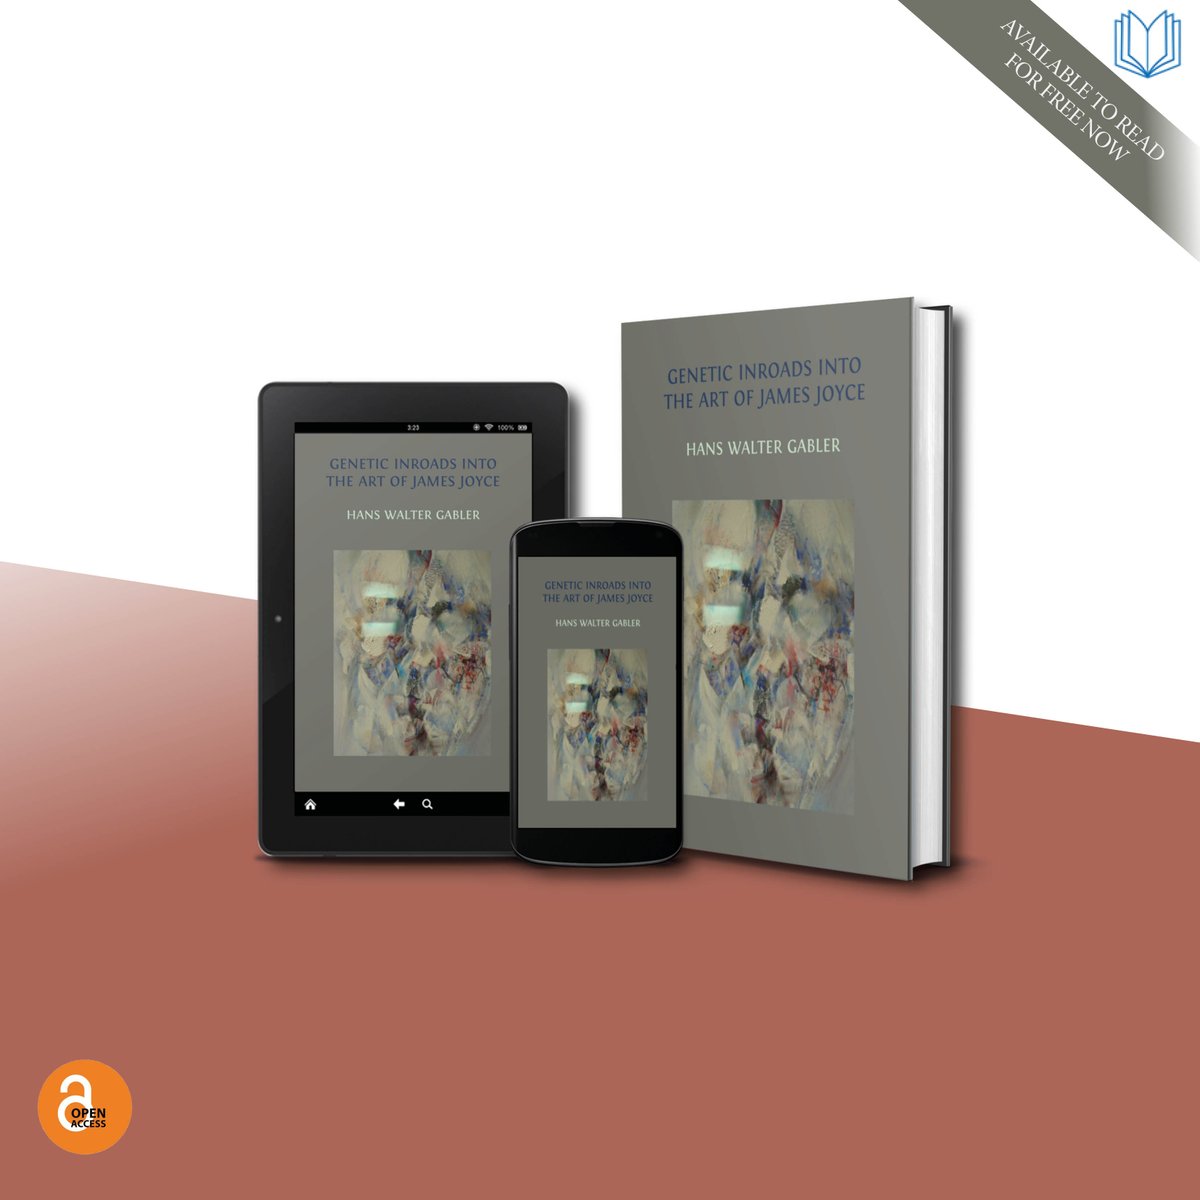 📢 New Book Alert! ✍️'#Genetic Inroads into the Art of #JamesJoyce' by Hans Walter Gabler is OUT NOW! 🔗Download for free/get a copy: openbookpublishers.com/books/10.11647… 🧵(1/6)